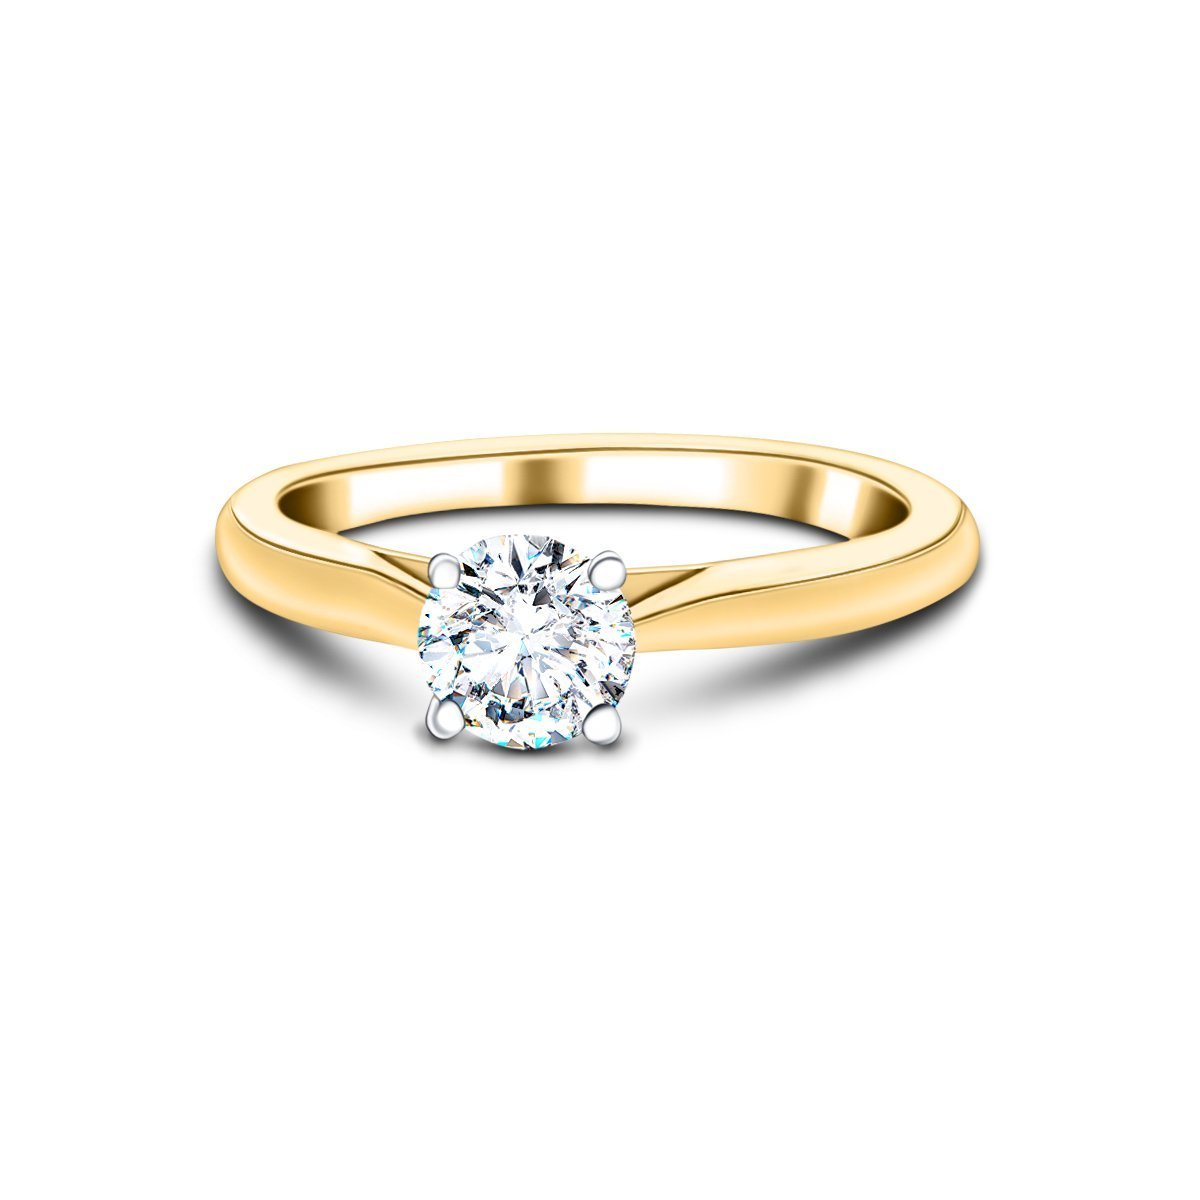 Certified Solitaire Diamond Engagement Ring 0.40ct H/SI Quality 18k Yellow Gold - All Diamond